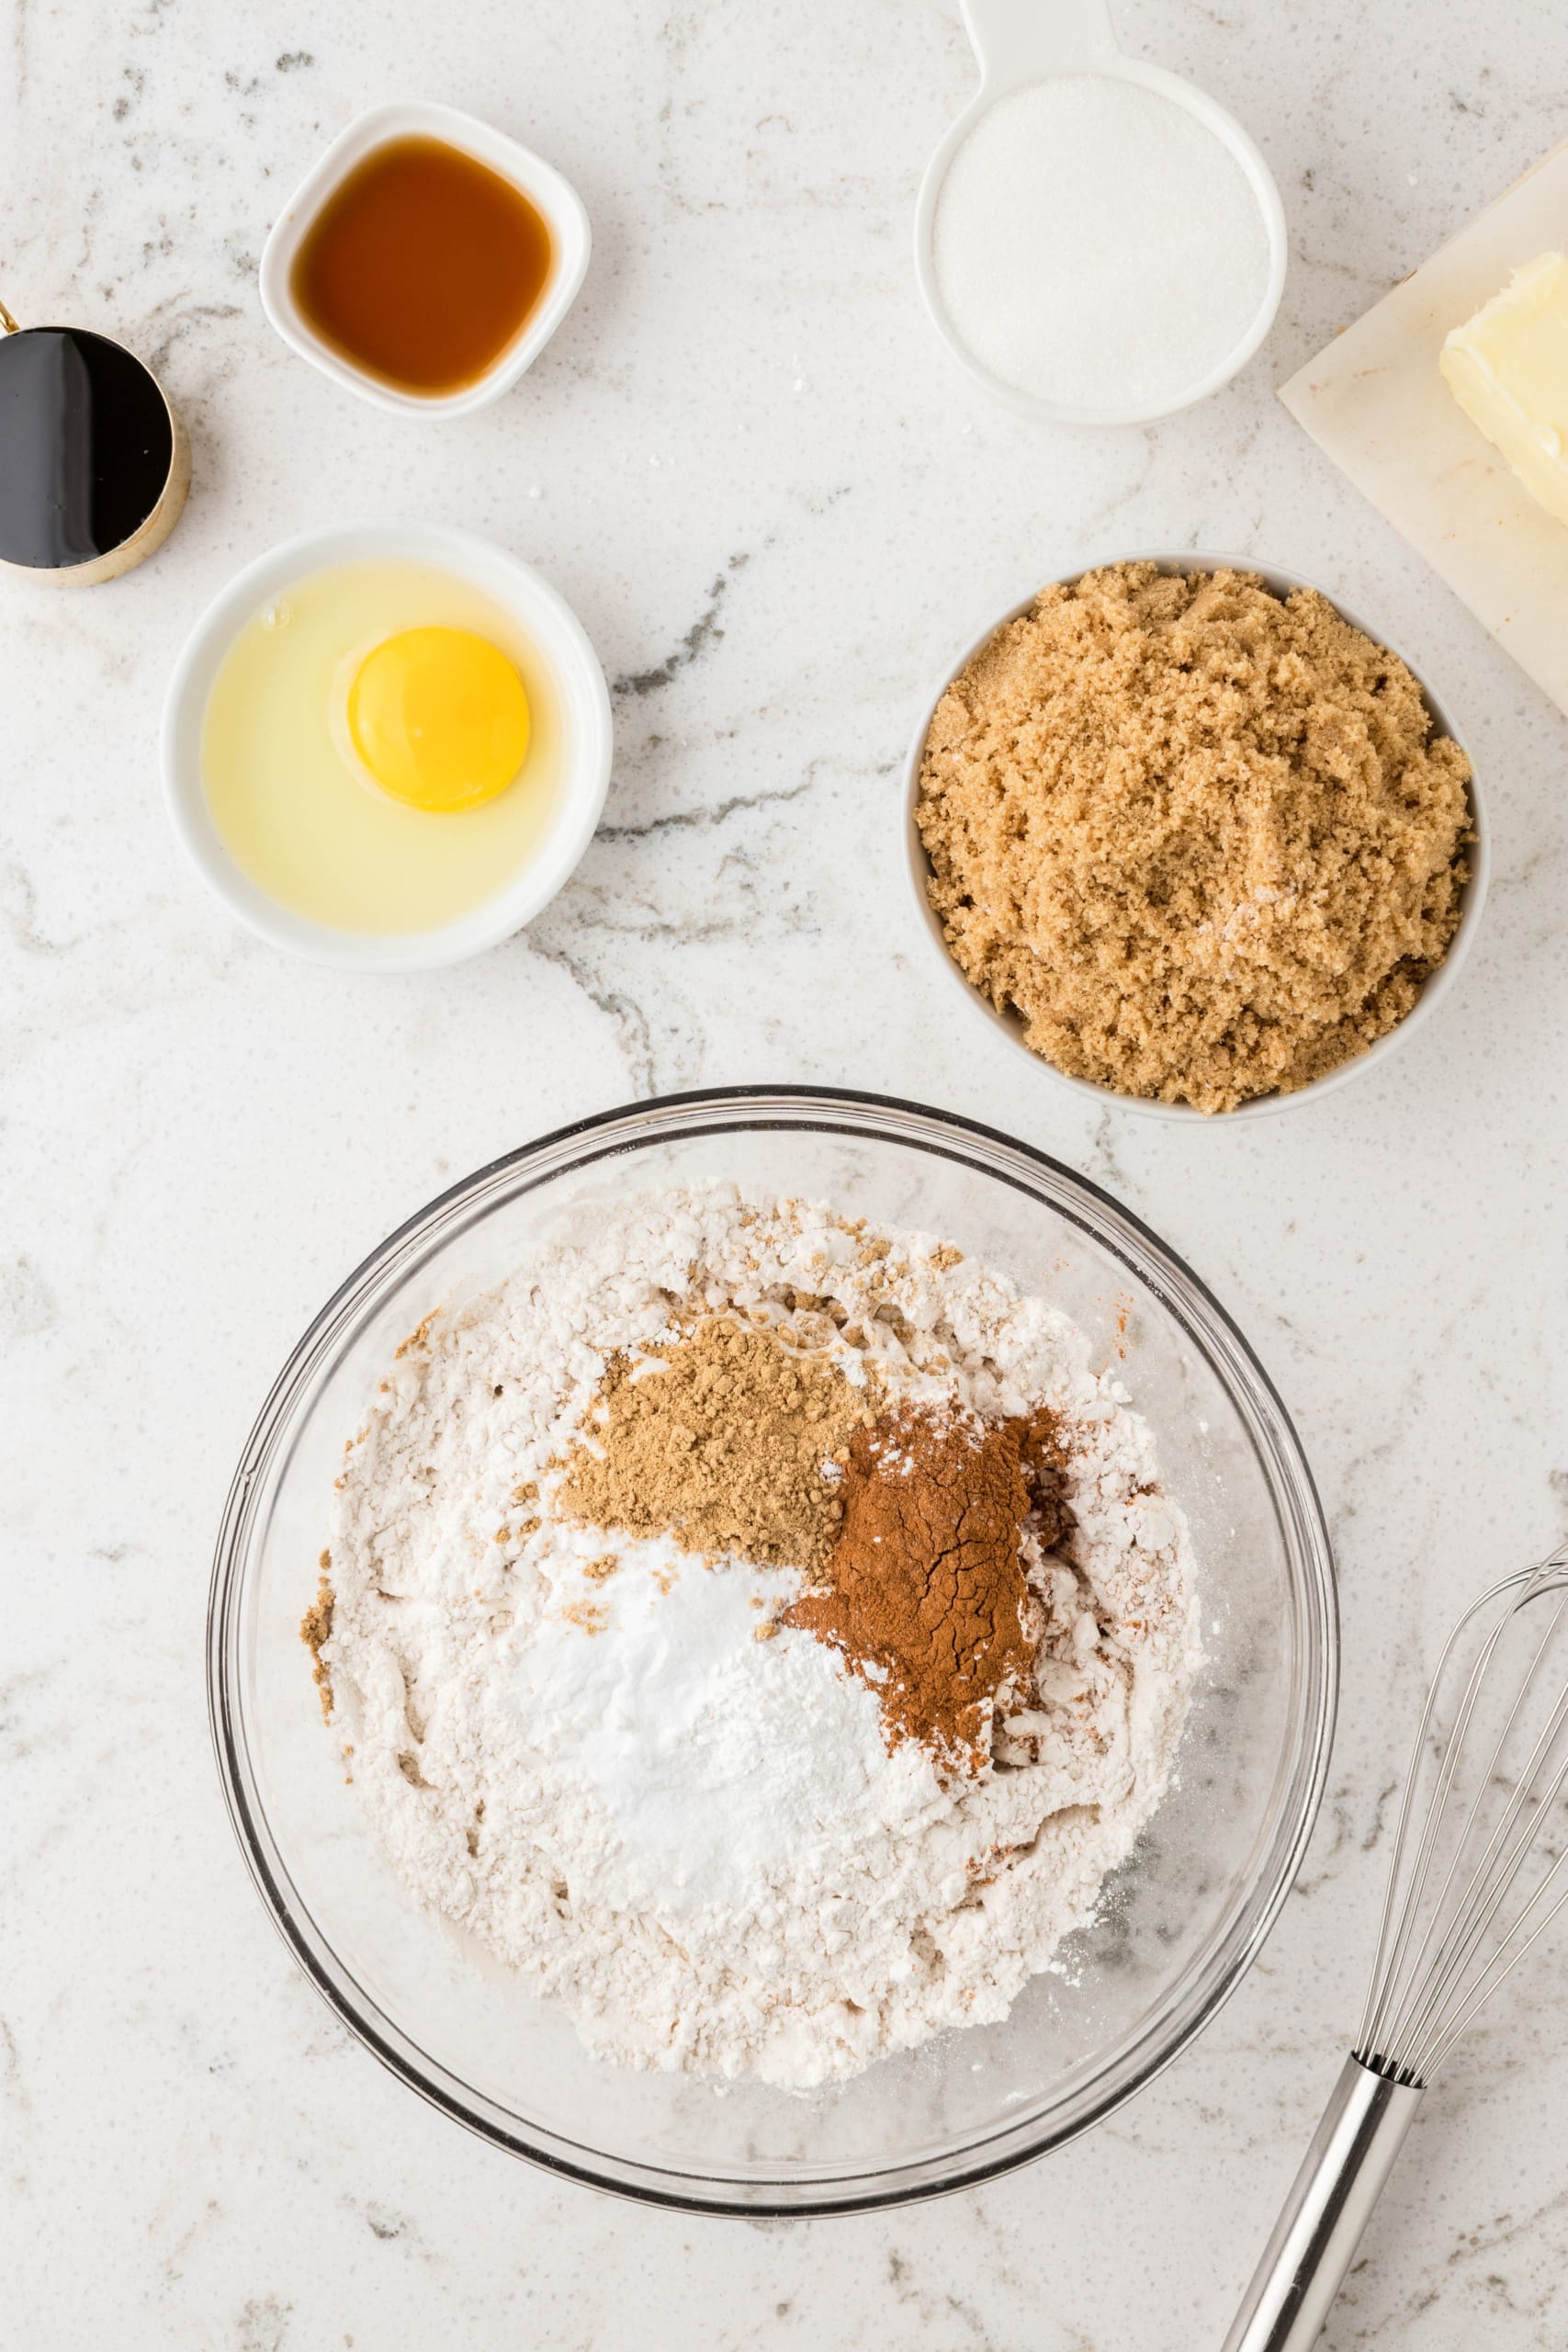 In a Medium mixing bowl add Flour, Ground Ginger, Ground Cinnamon, Baking Soda, Baking Powder and Kosher Salt. Whisk to combine and set aside.